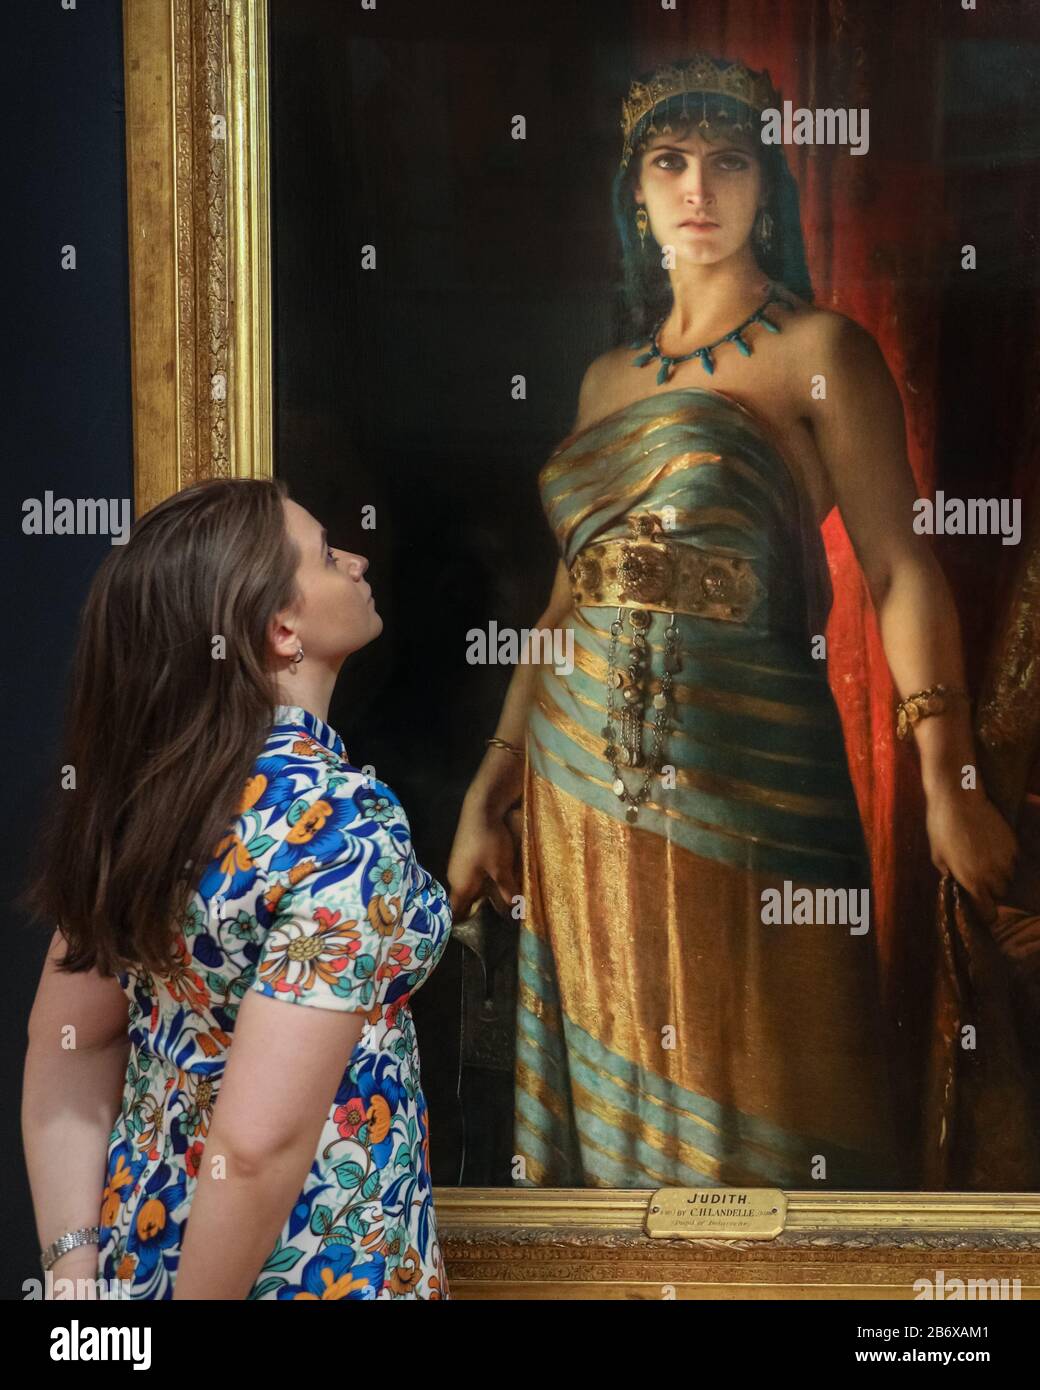 London, UK. 12th Mar, 2020. An assistant poses with Charles Landelle's 'Judith', 1887. 'The Enchanted Interior' at Guildhall Art Gallery, challenges the historic depiction of women in art with Pre-Raphaelite and contemporary female artists' works. The exhibition runs 13th March to 14th June, 2020. Credit: Imageplotter/Alamy Live News Stock Photo